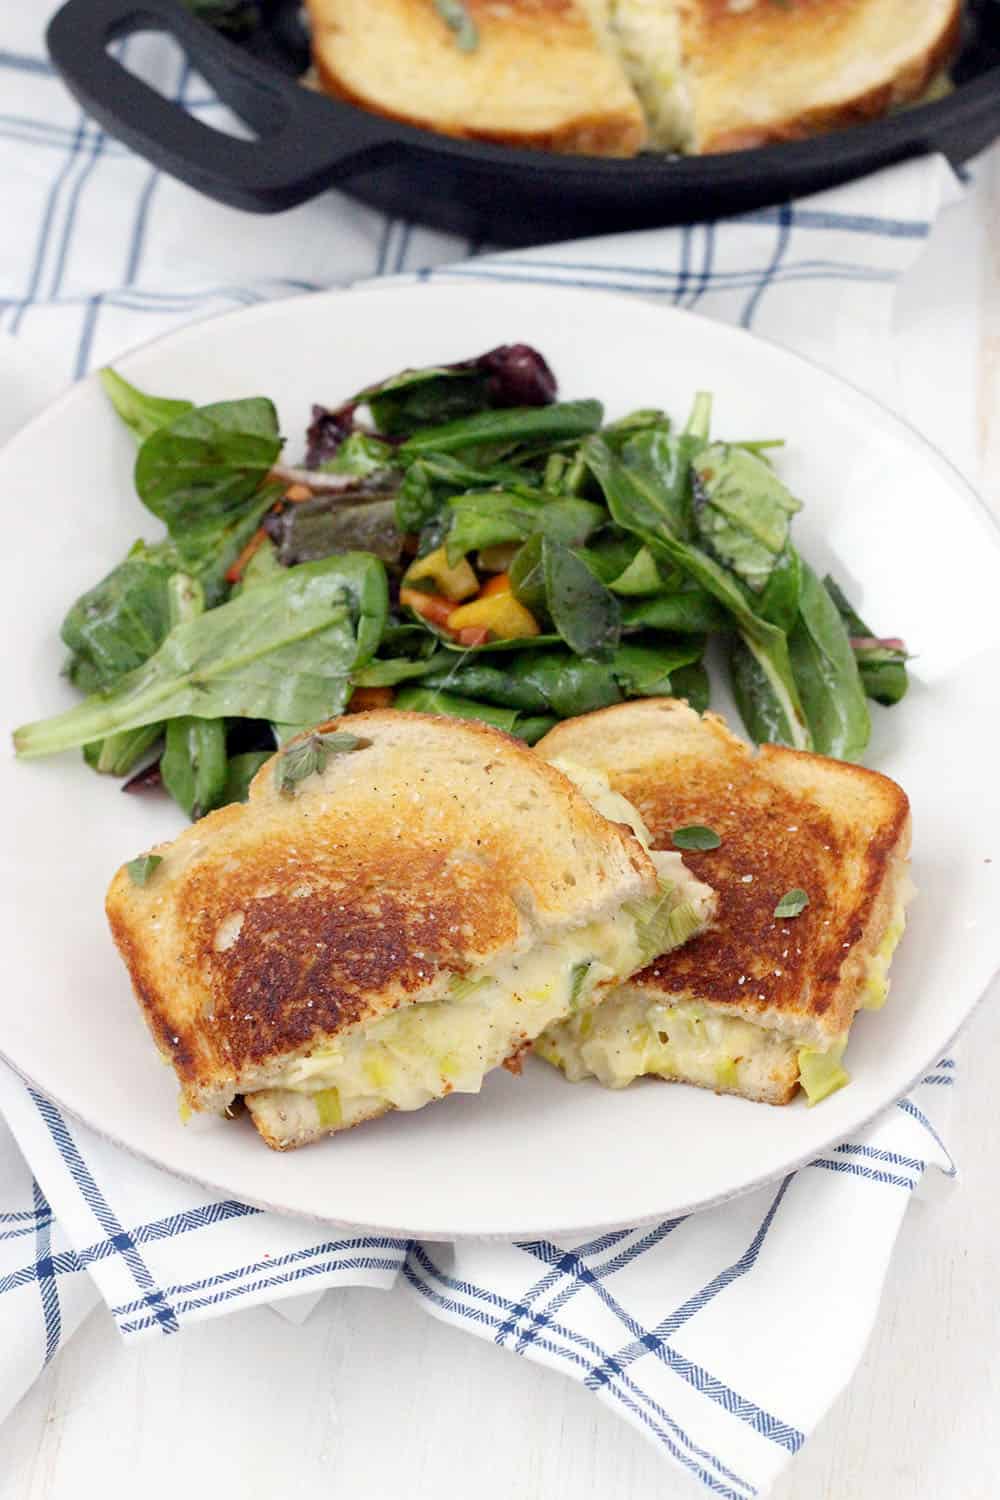 This Leek and Gruyere Grilled Cheese recipe is rich and buttery. Every bite is infused with perfectly melted cheese and that subtle, savory, onion flavor leeks are known for. The perfect easy weeknight dinner with a simple salad or light soup!